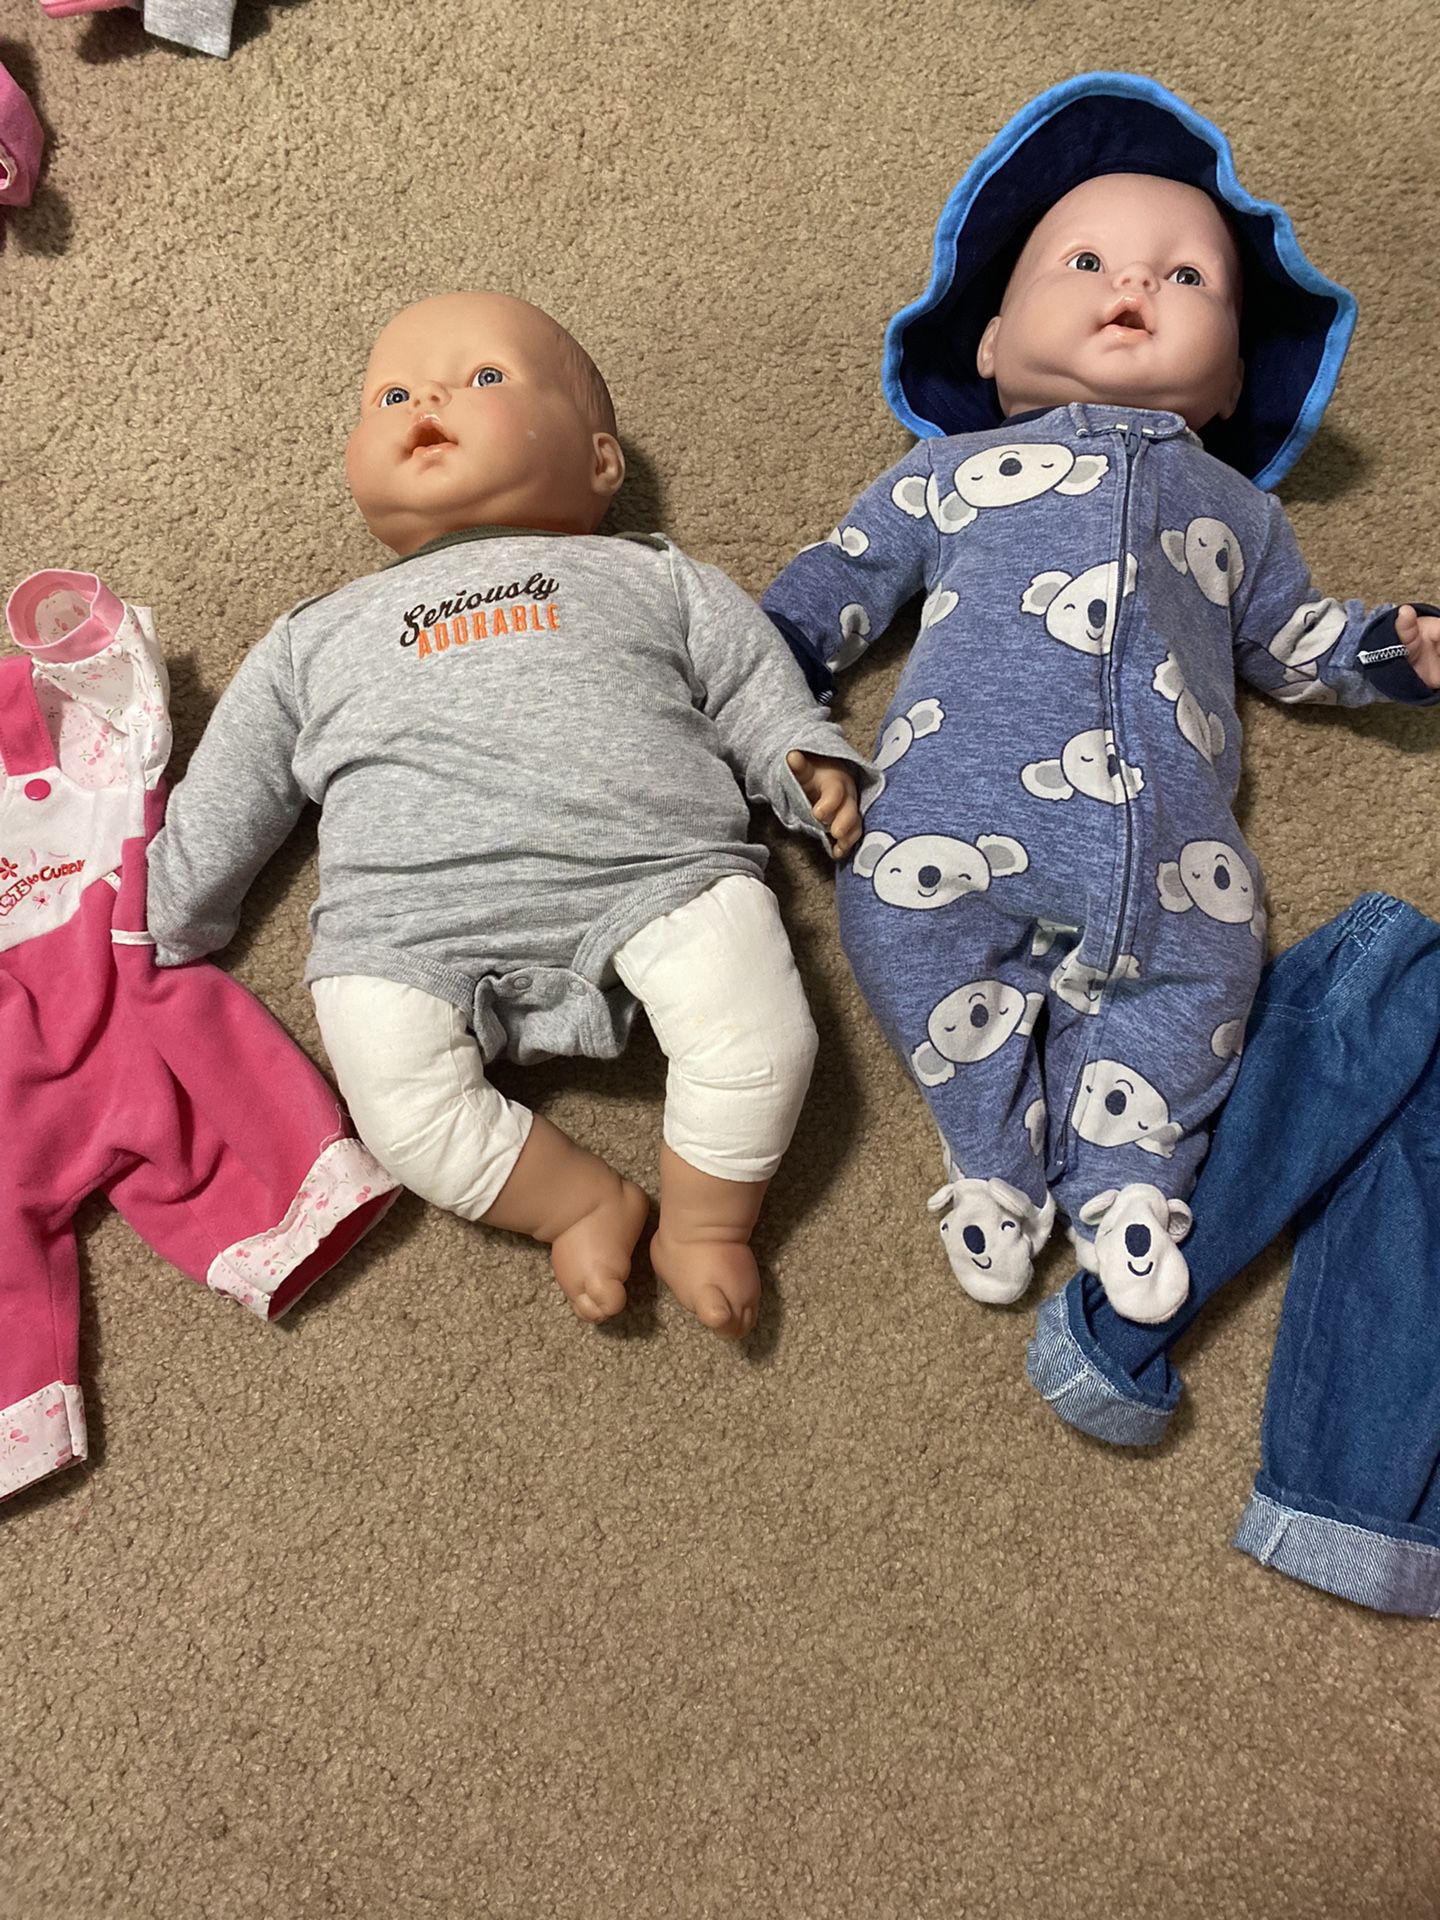 Large Baby Dolls 20 Inch Long 